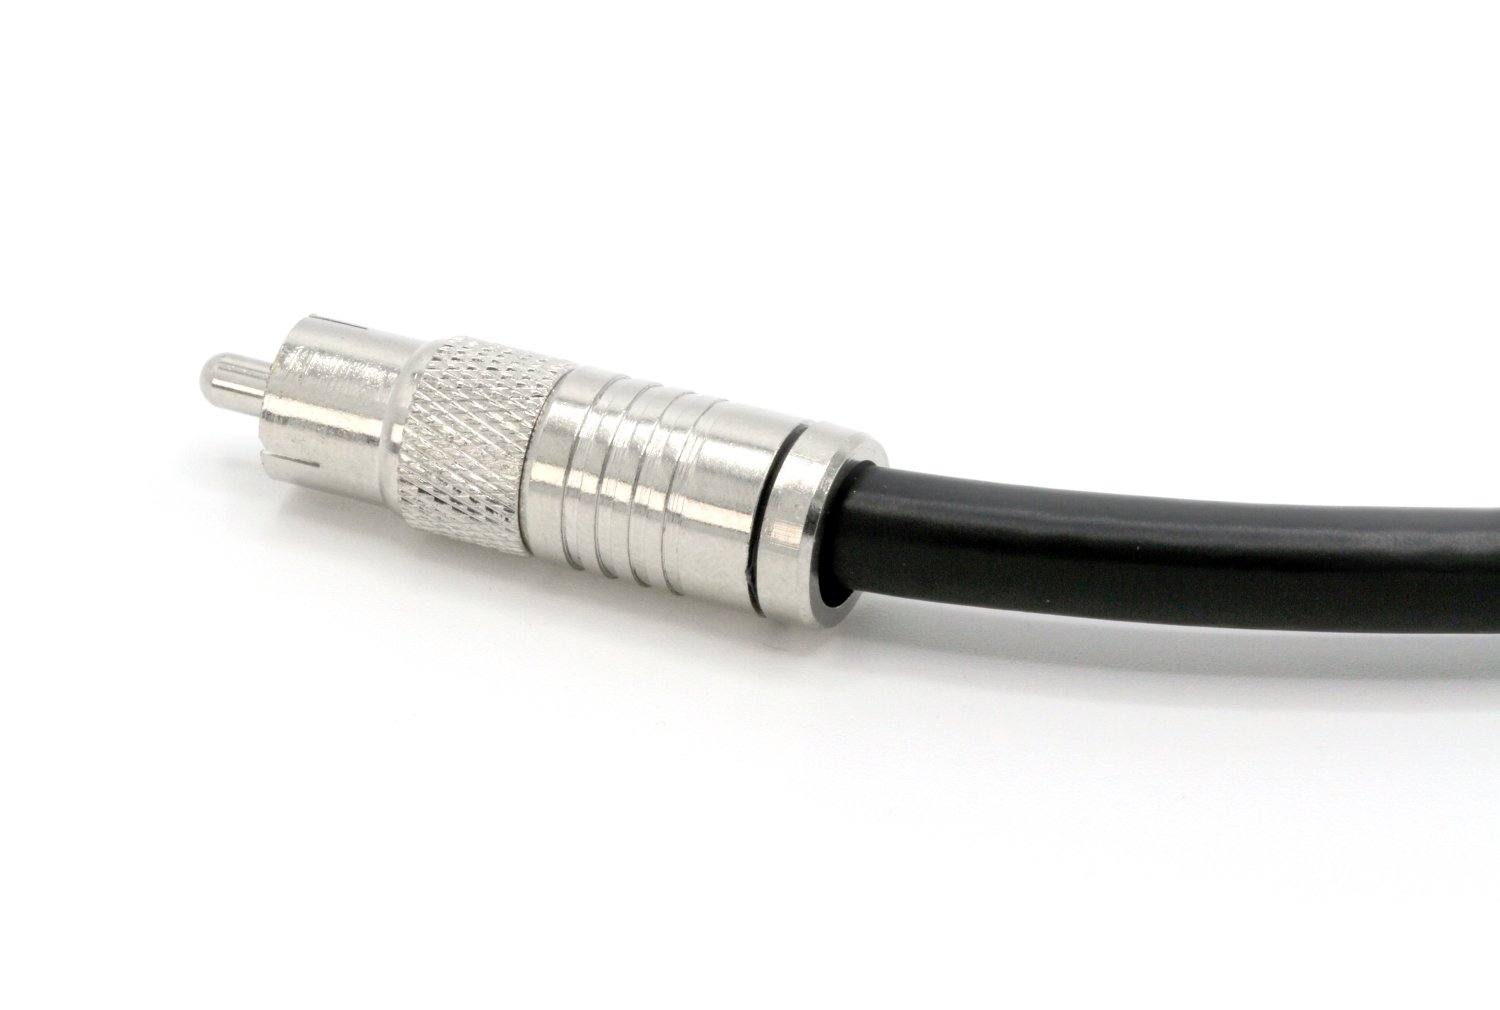 The Cimple Co Digital Audio Coaxial Cable | Subwoofer Cable – (S/PDIF) RCA Cable, 75 Feet